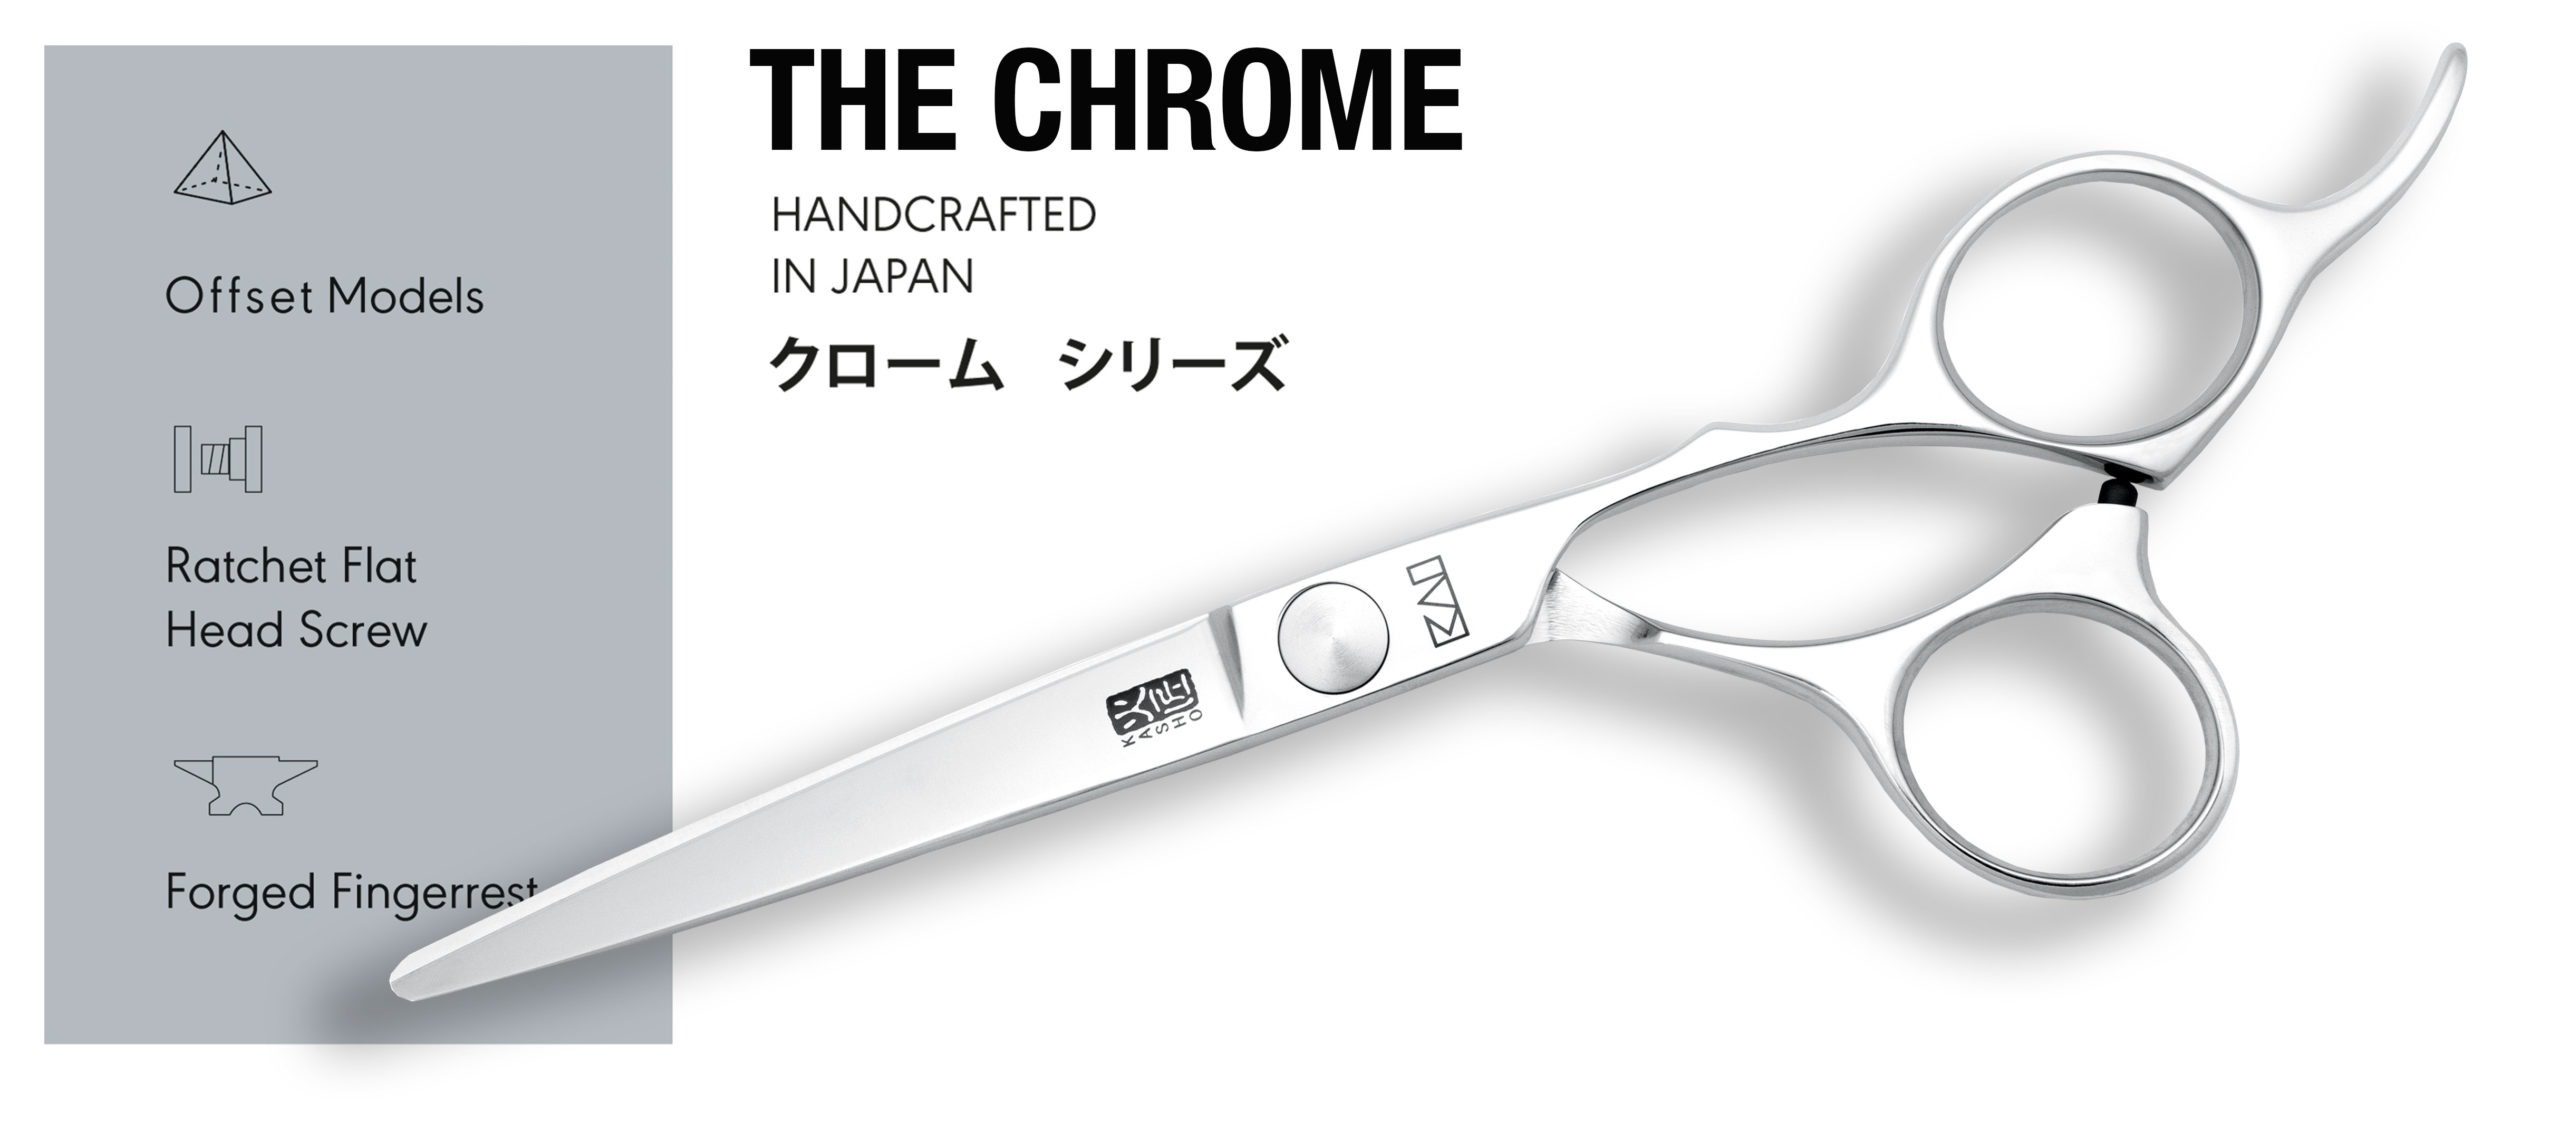 Kasho Chrome shears silver colour image with features and benefits